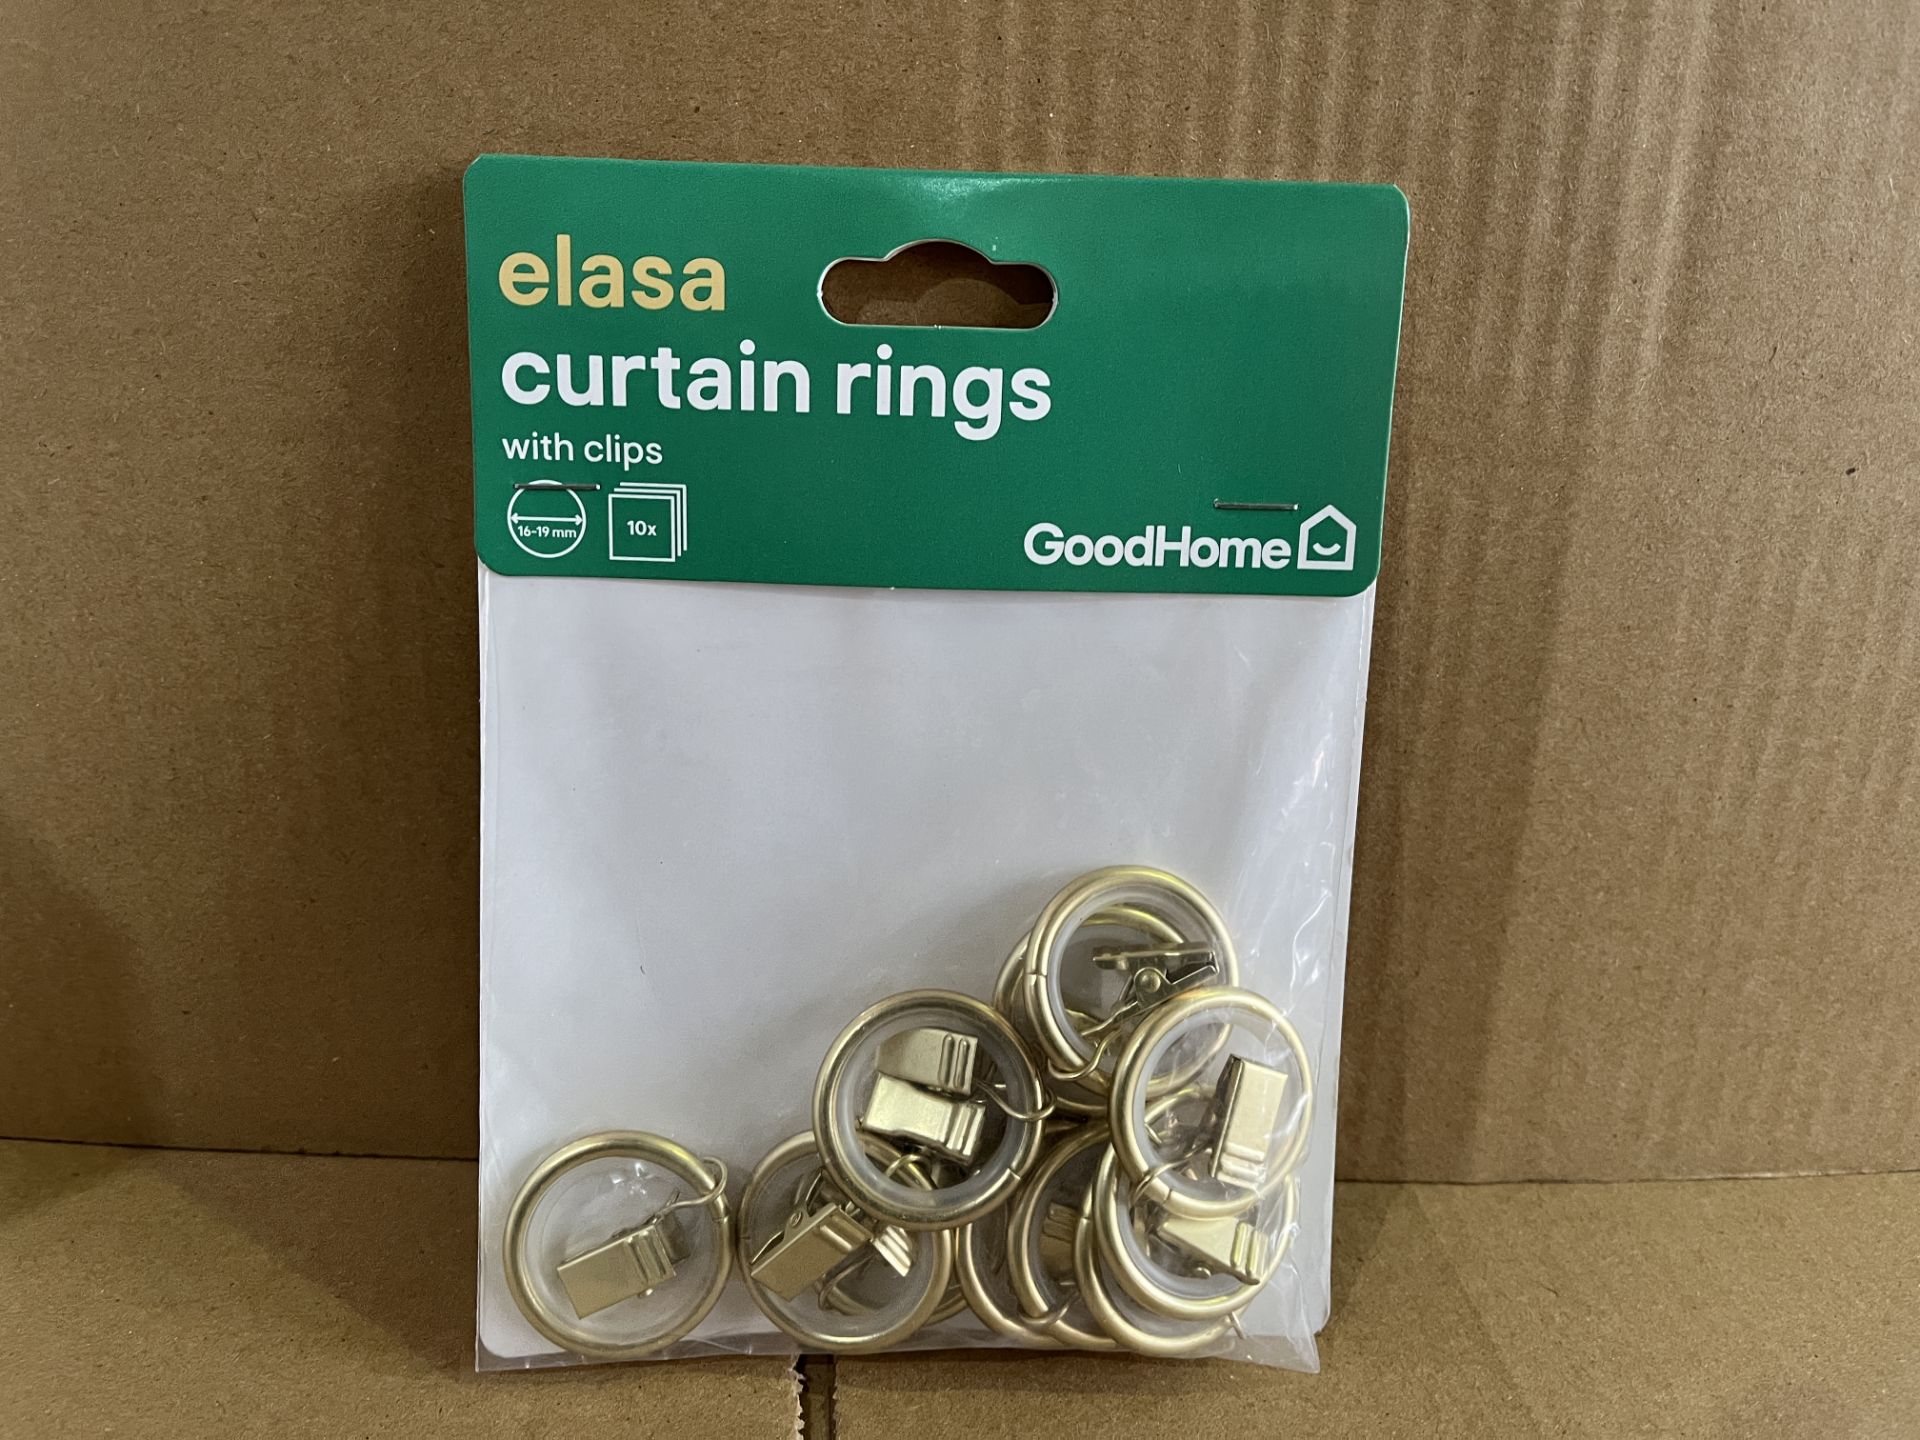 120 X BRAND NEW PACKS OF 6 ELASA CURTAIN RINGS WITH CLIPS R15